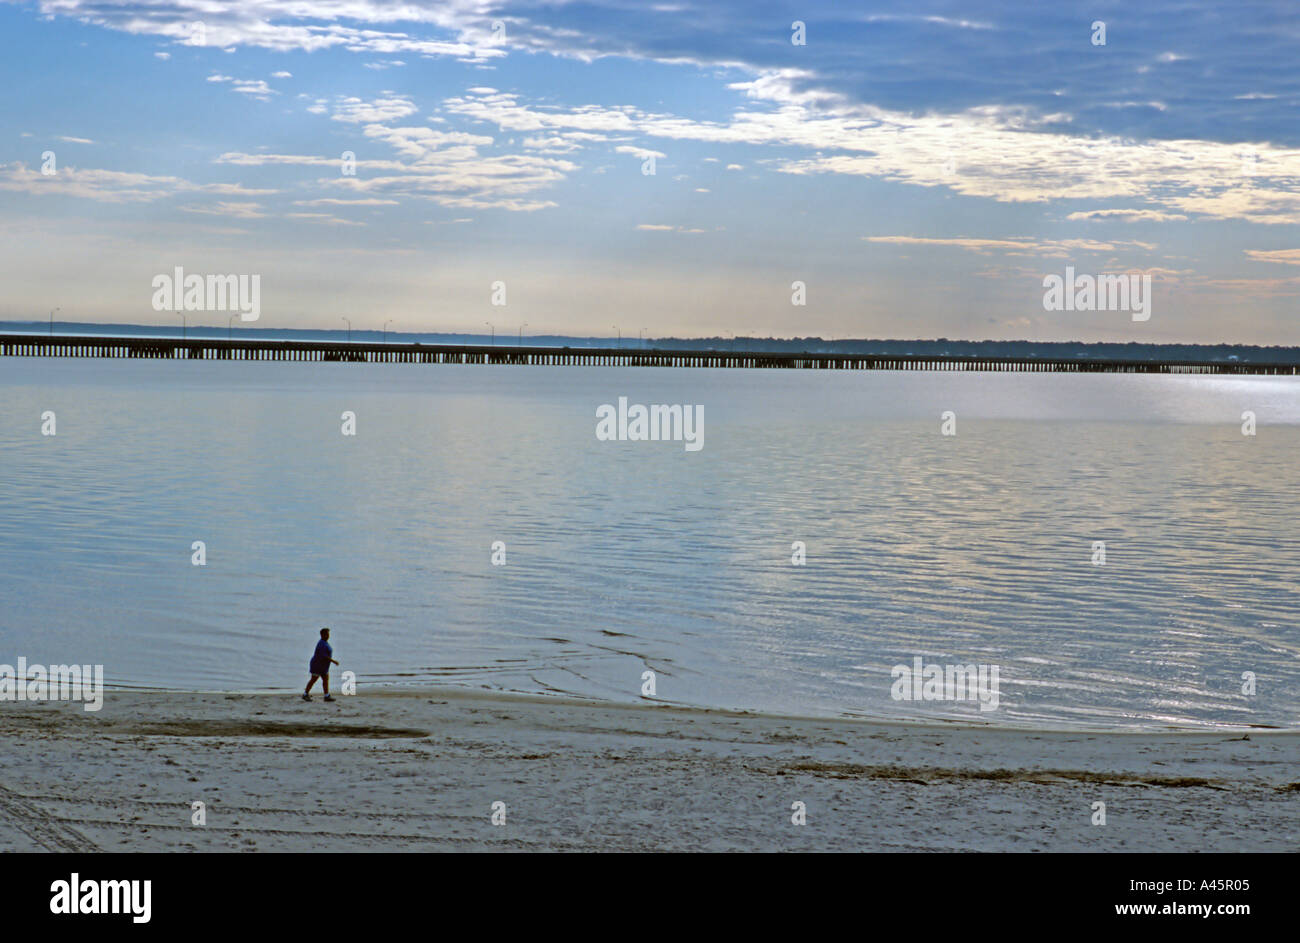 A woman takes an early morning stroll on the beach of Bay Saint Louis Mississippi Stock Photo